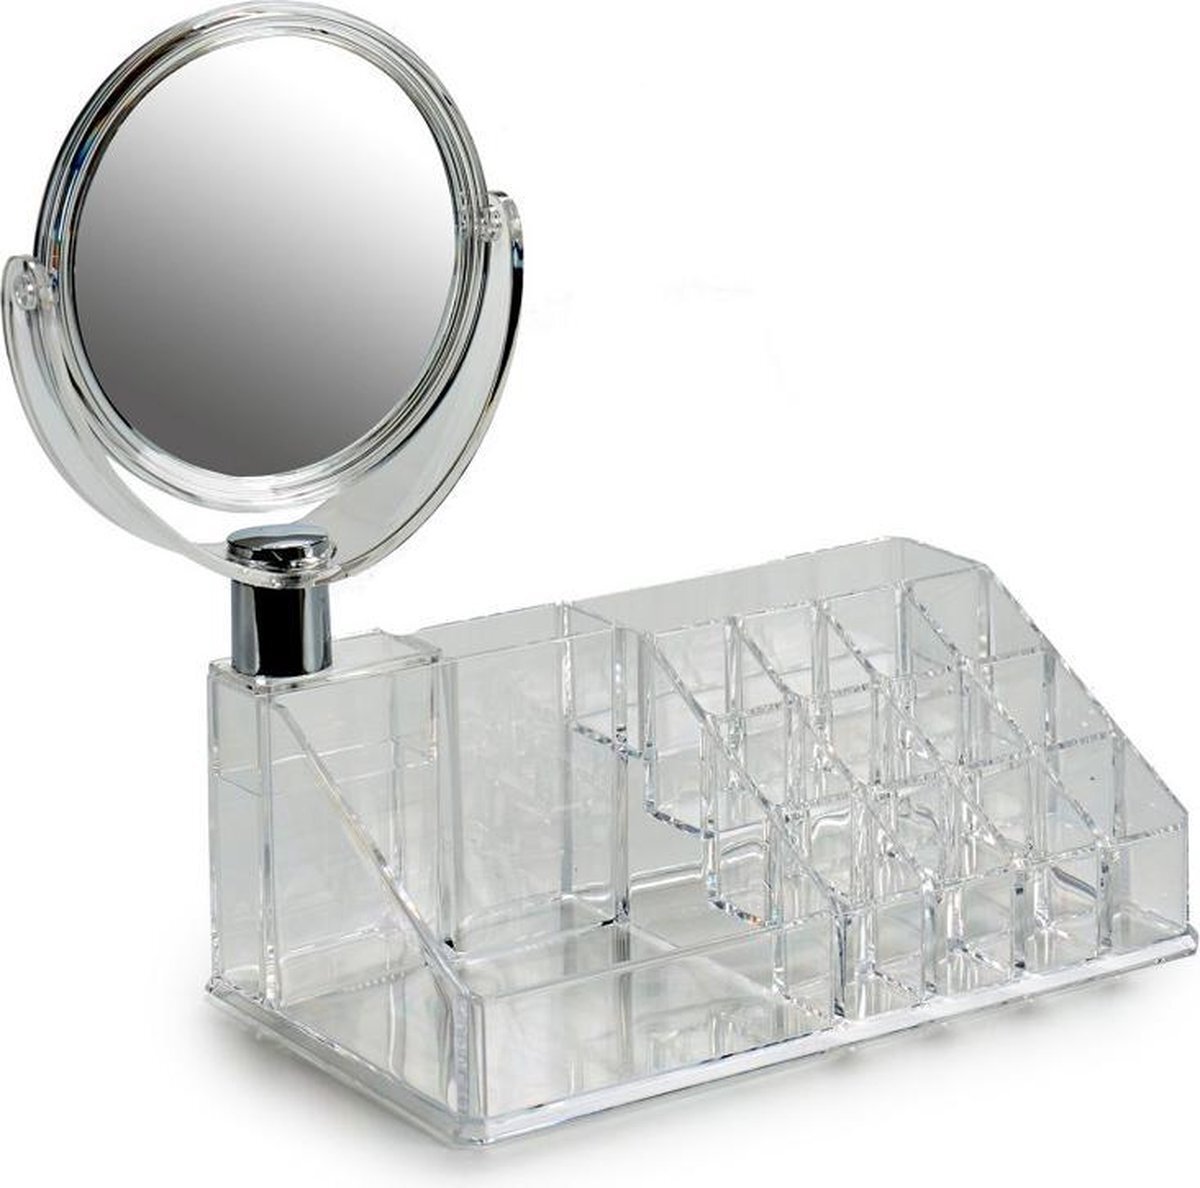 Tendencia Unica Clear Plastic Cosmetic And Makeup Organizer. Designed With 15 Compartments And A Mirror